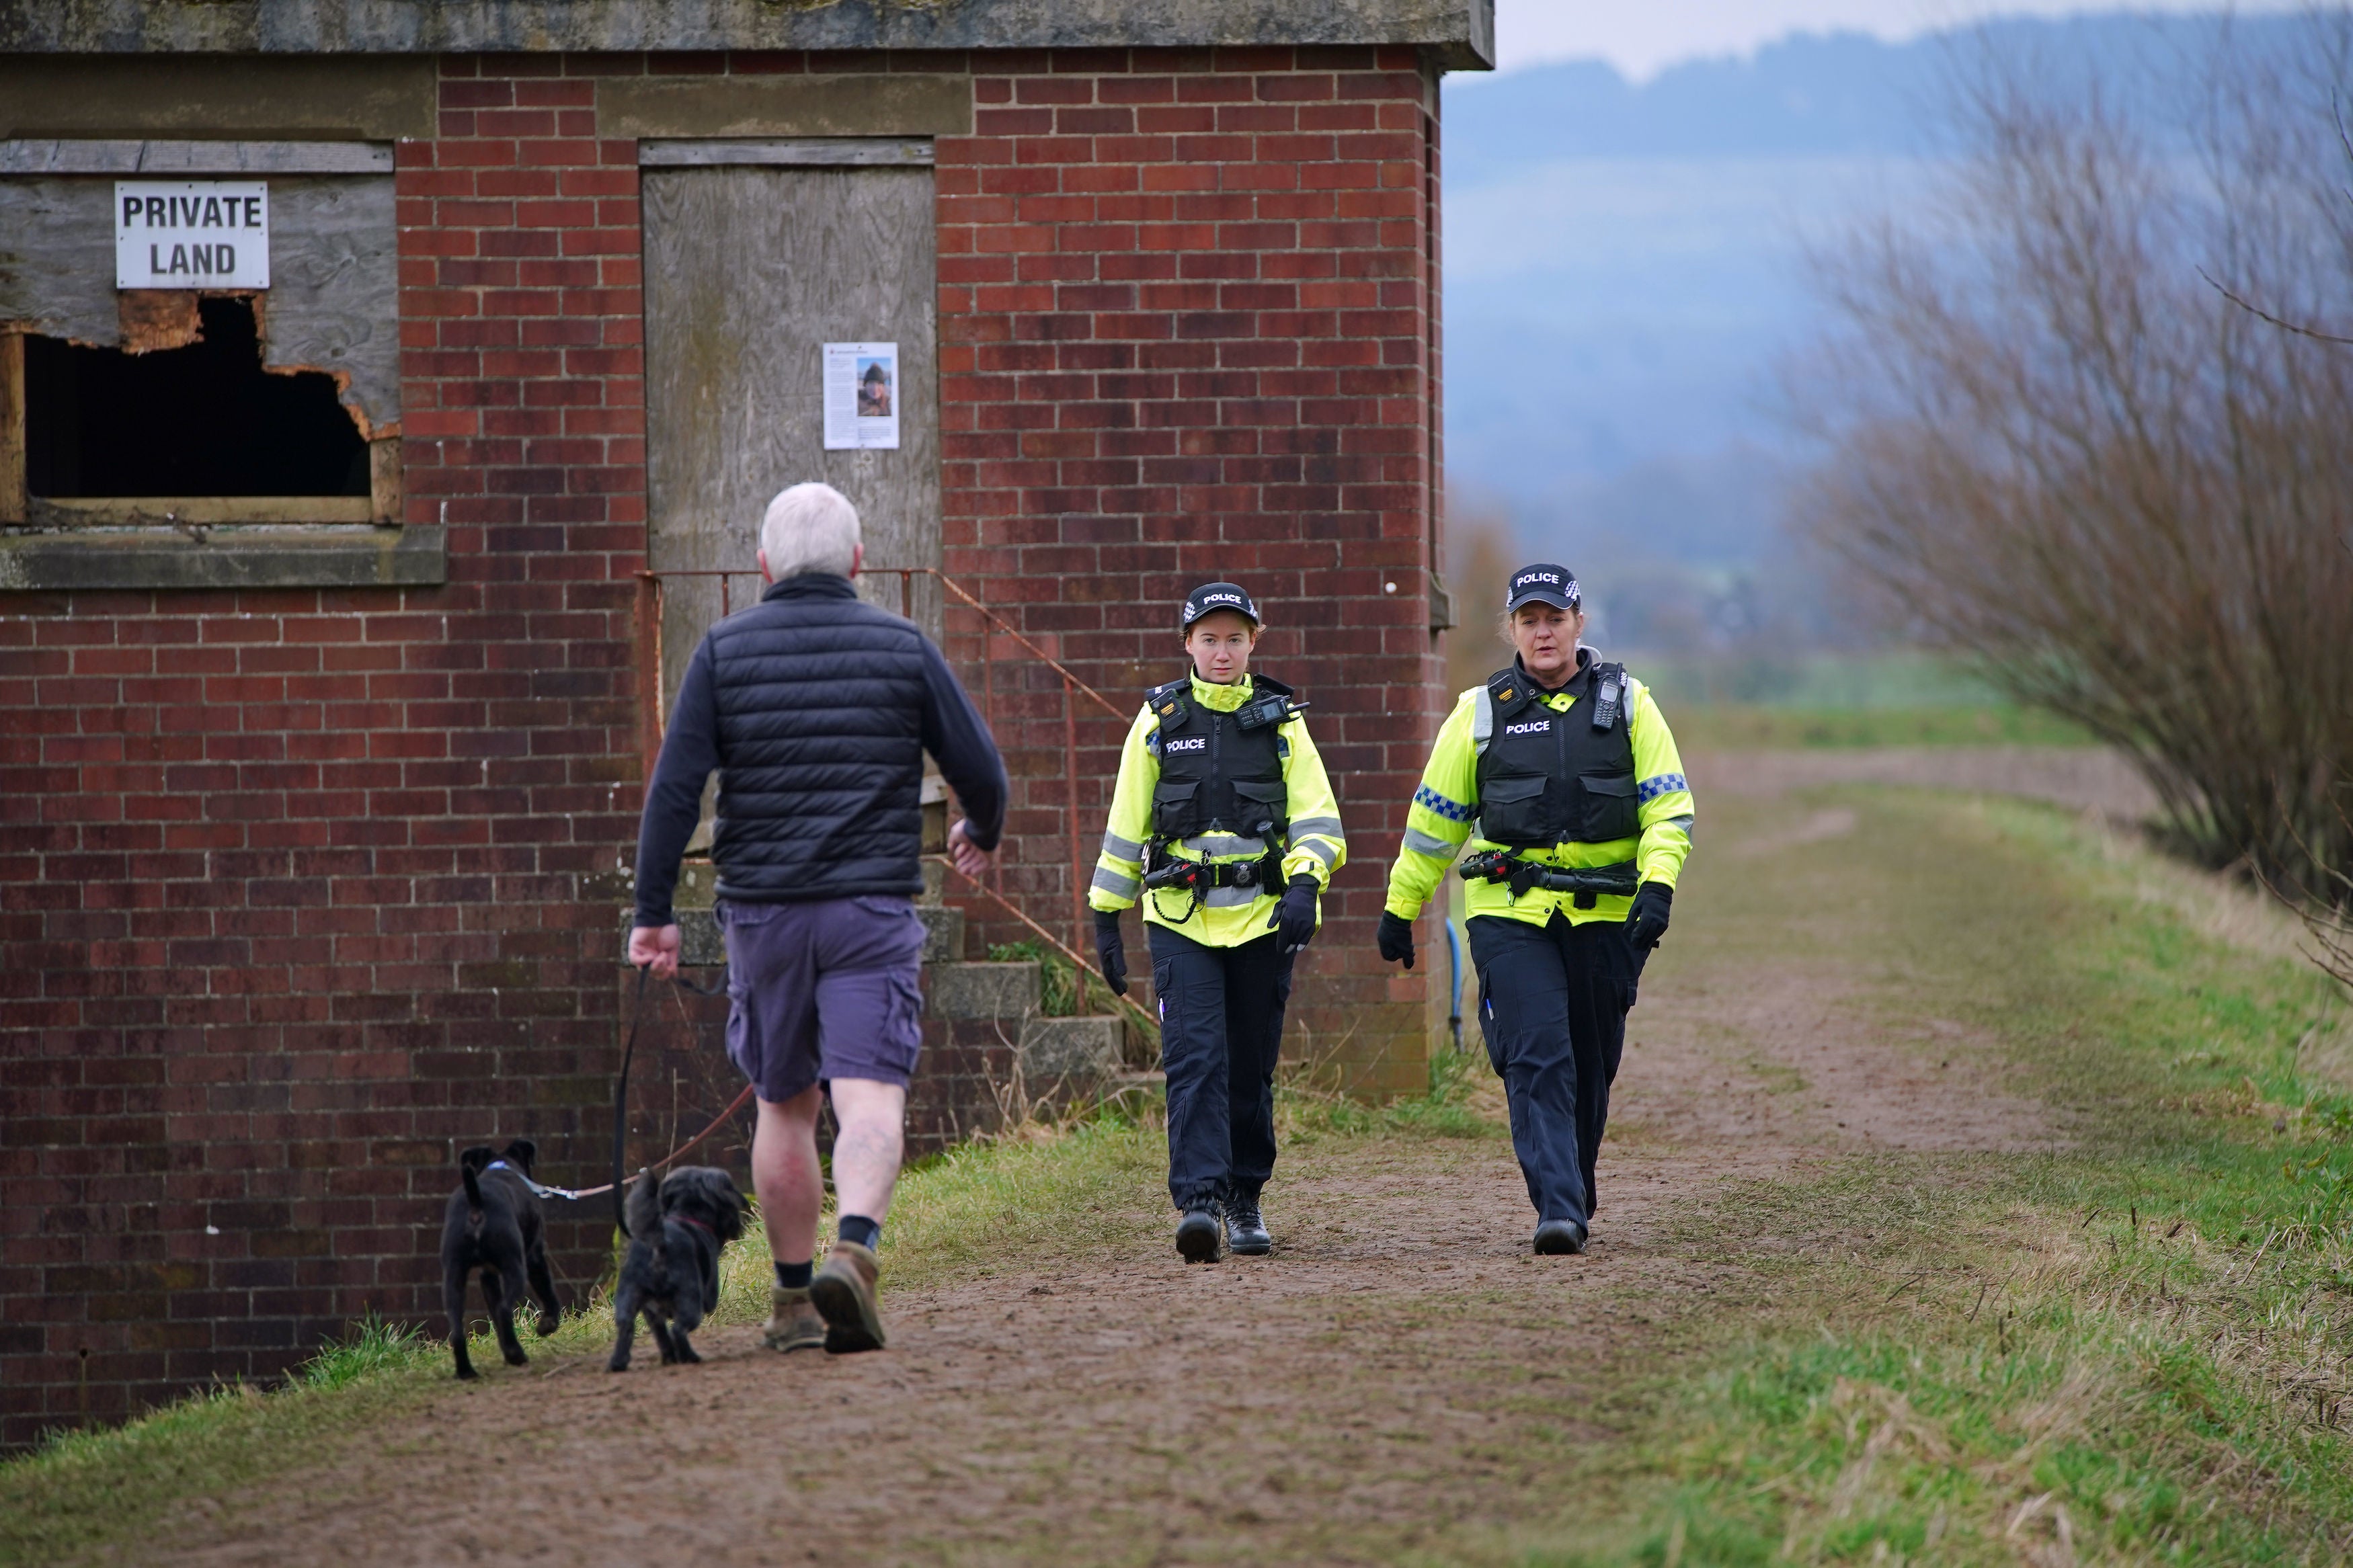 Police officers walk along a footpath in St Michael's on Wyre, Lancashire, as they continue their search for missing woman Nicola Bulley